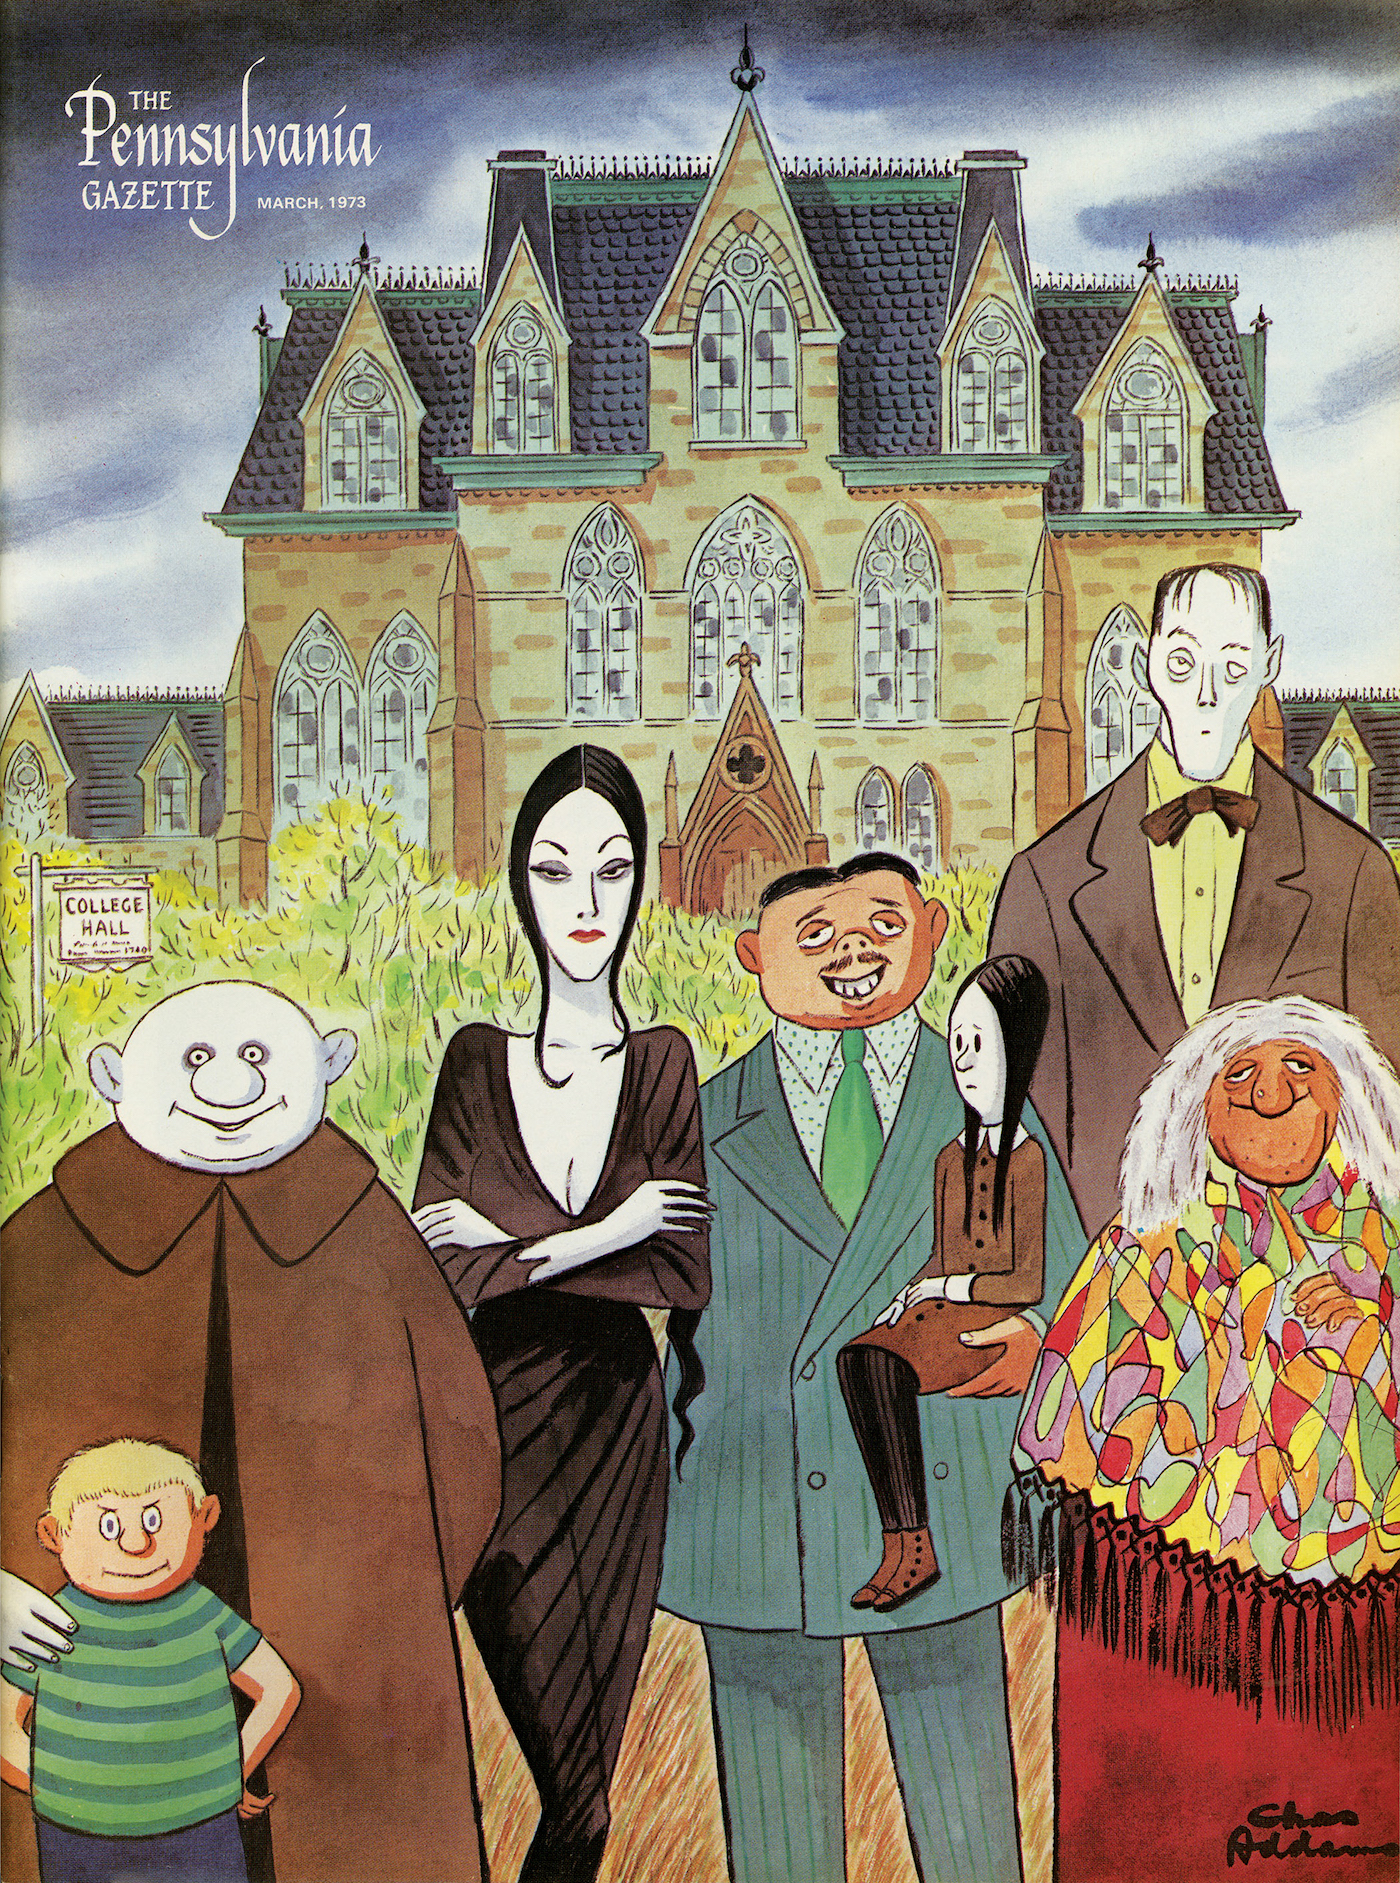 Illustration of six Addams Family characters standing in front of College Hall.